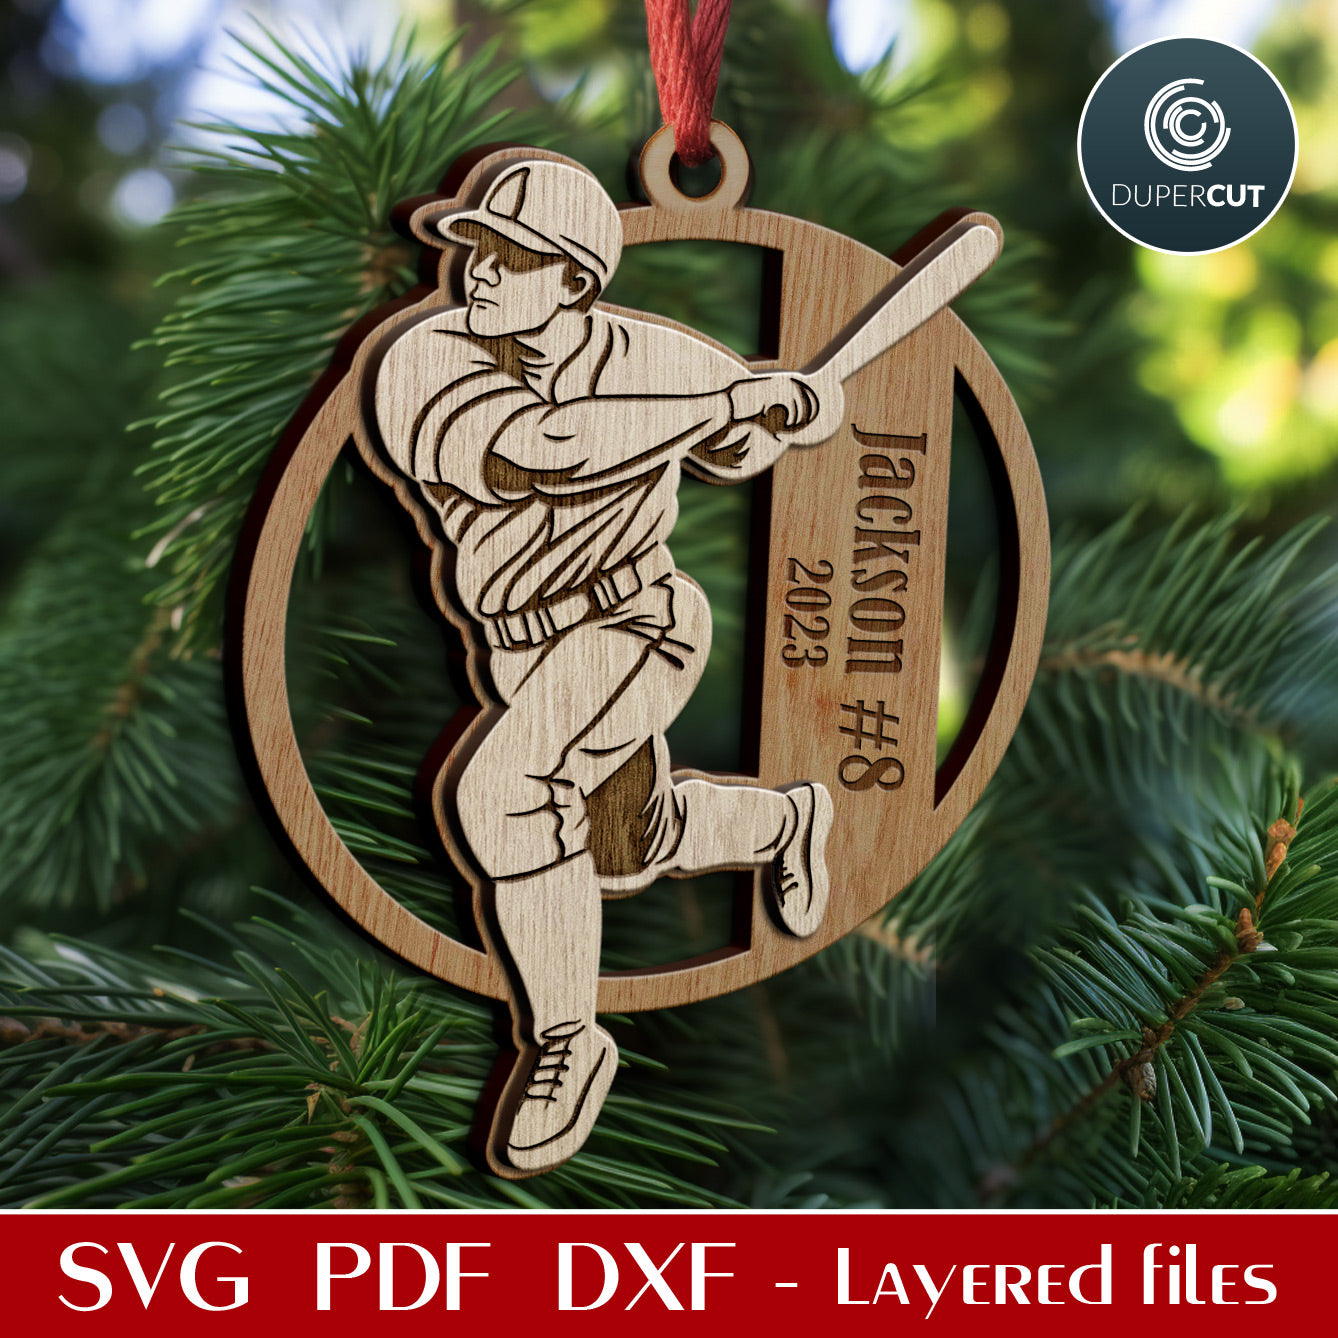 Personalized Baseball player ornaments layered cut files template, Christmas tree decoration SVG files for Glowforge, Xtool, CNC laser machines, Cricut, by www.DuperCut.com